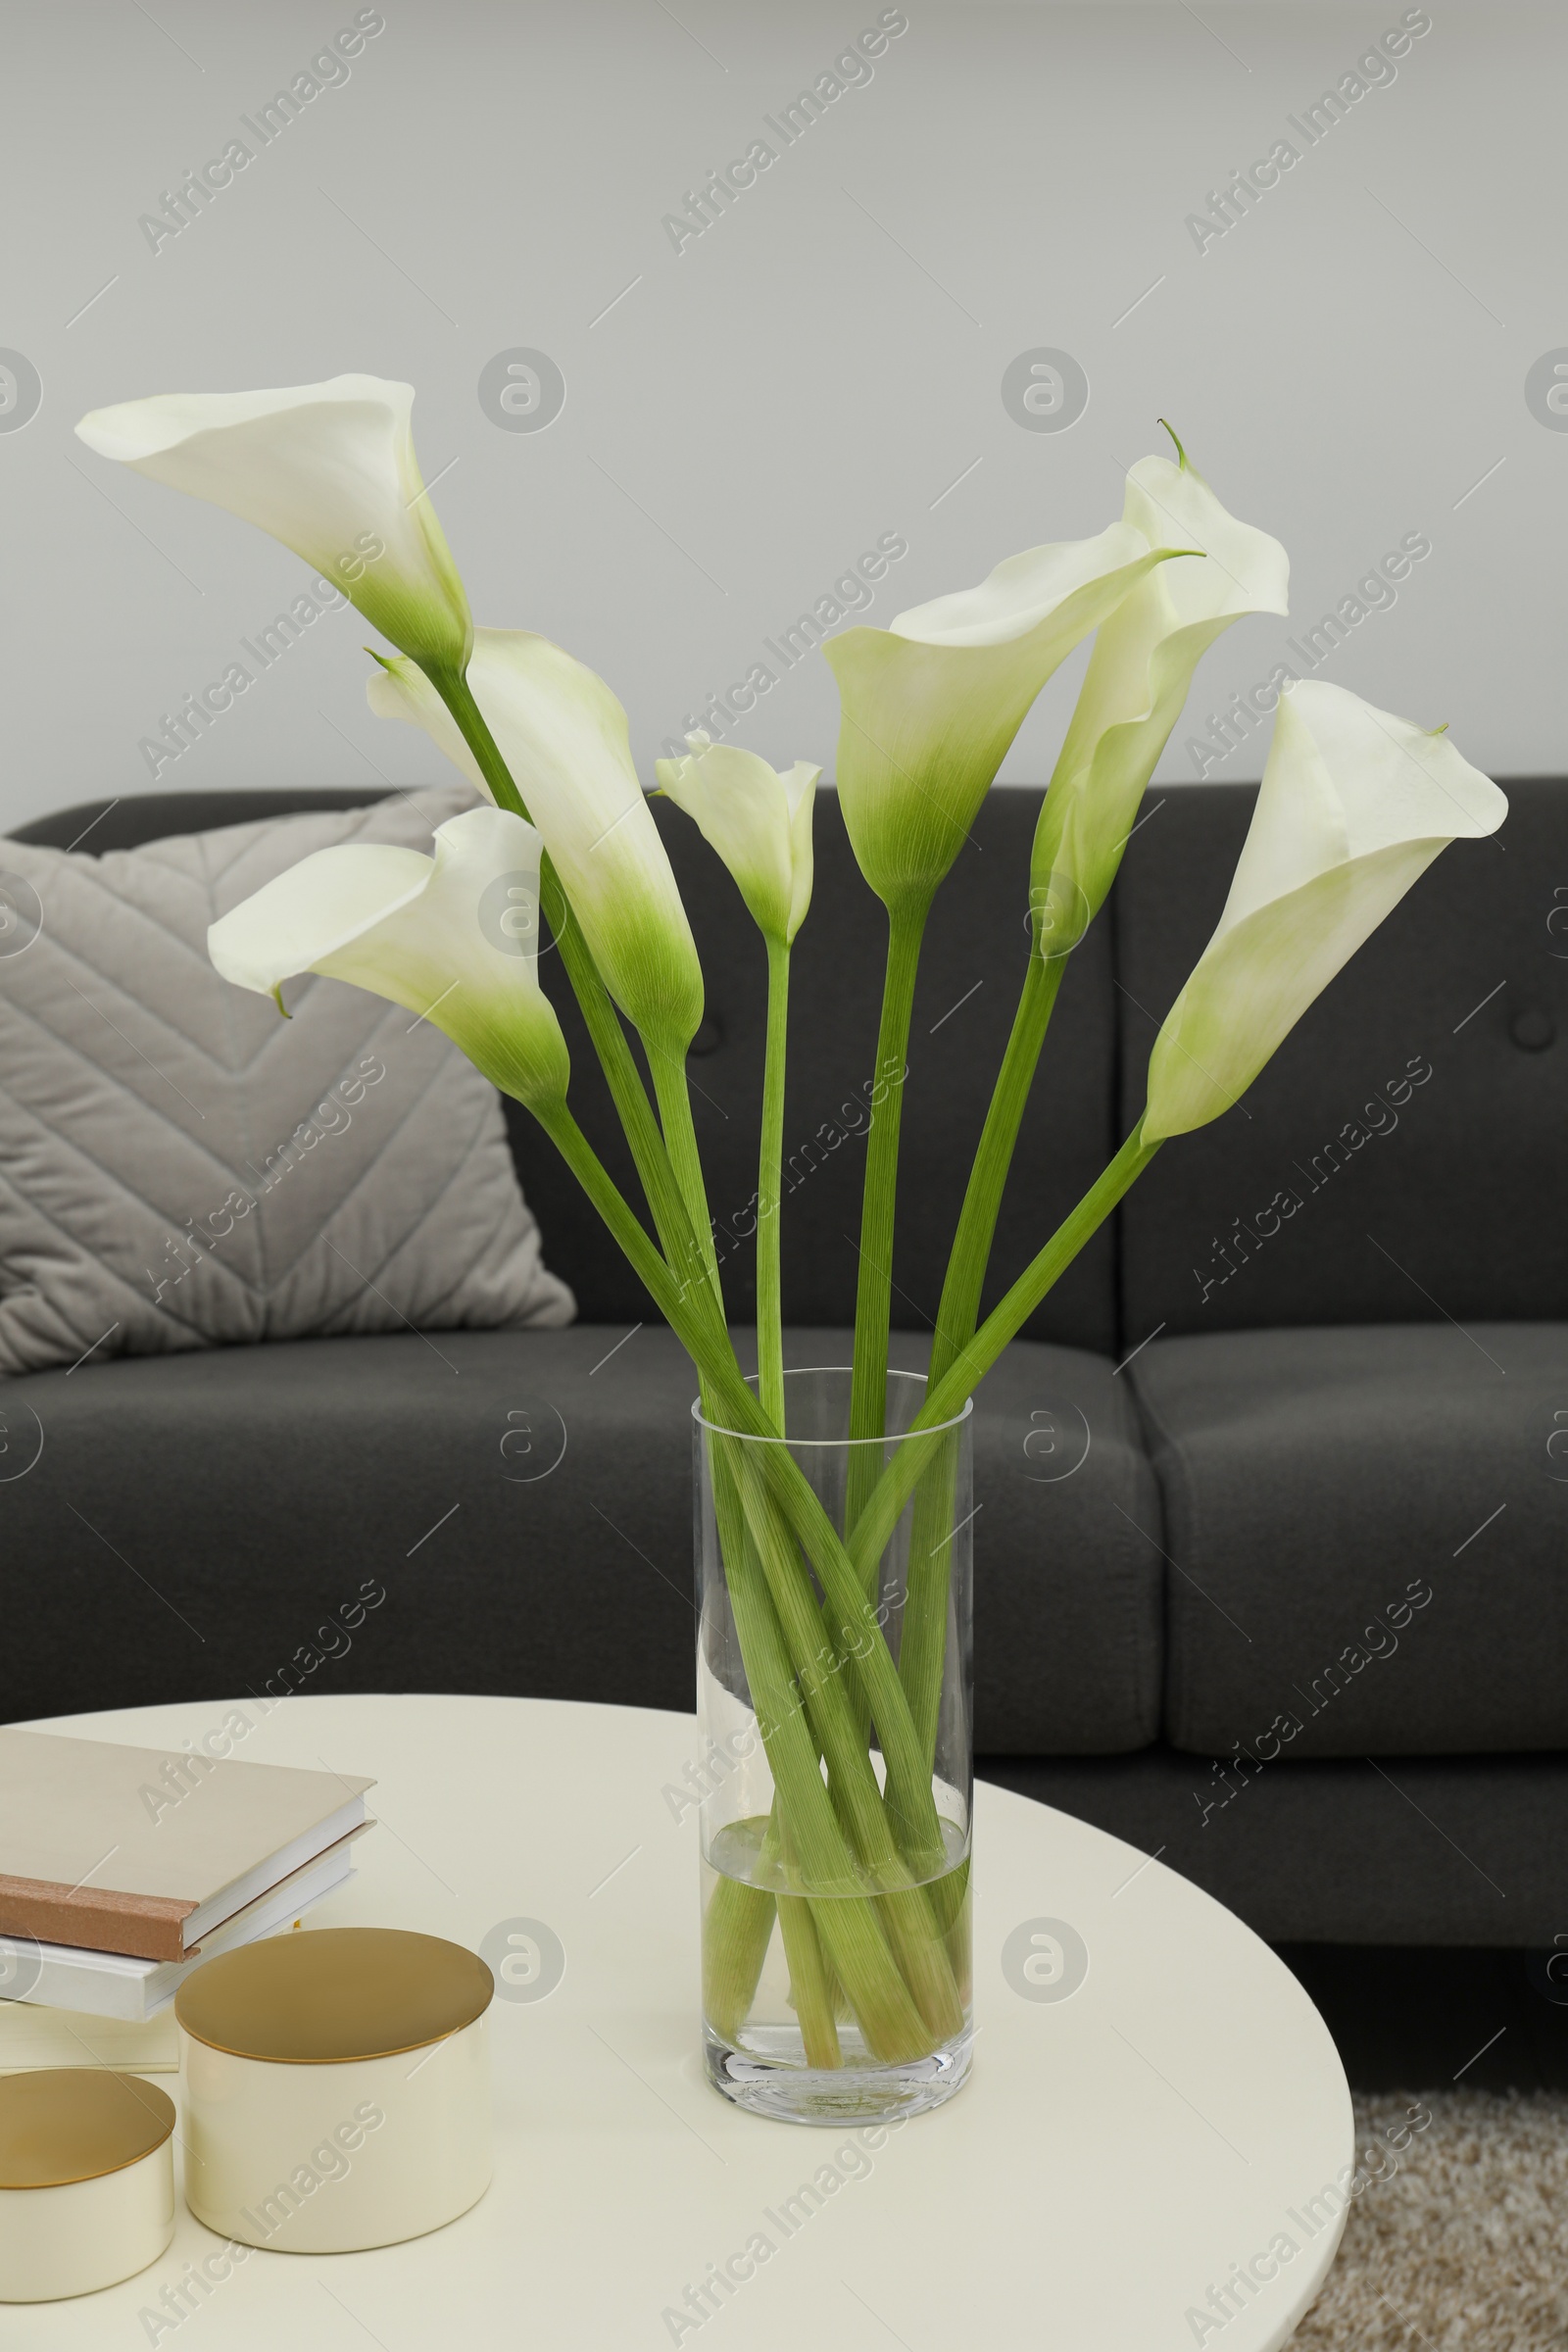 Photo of Beautiful calla lily flowers in glass vase, boxes and books on white table at home